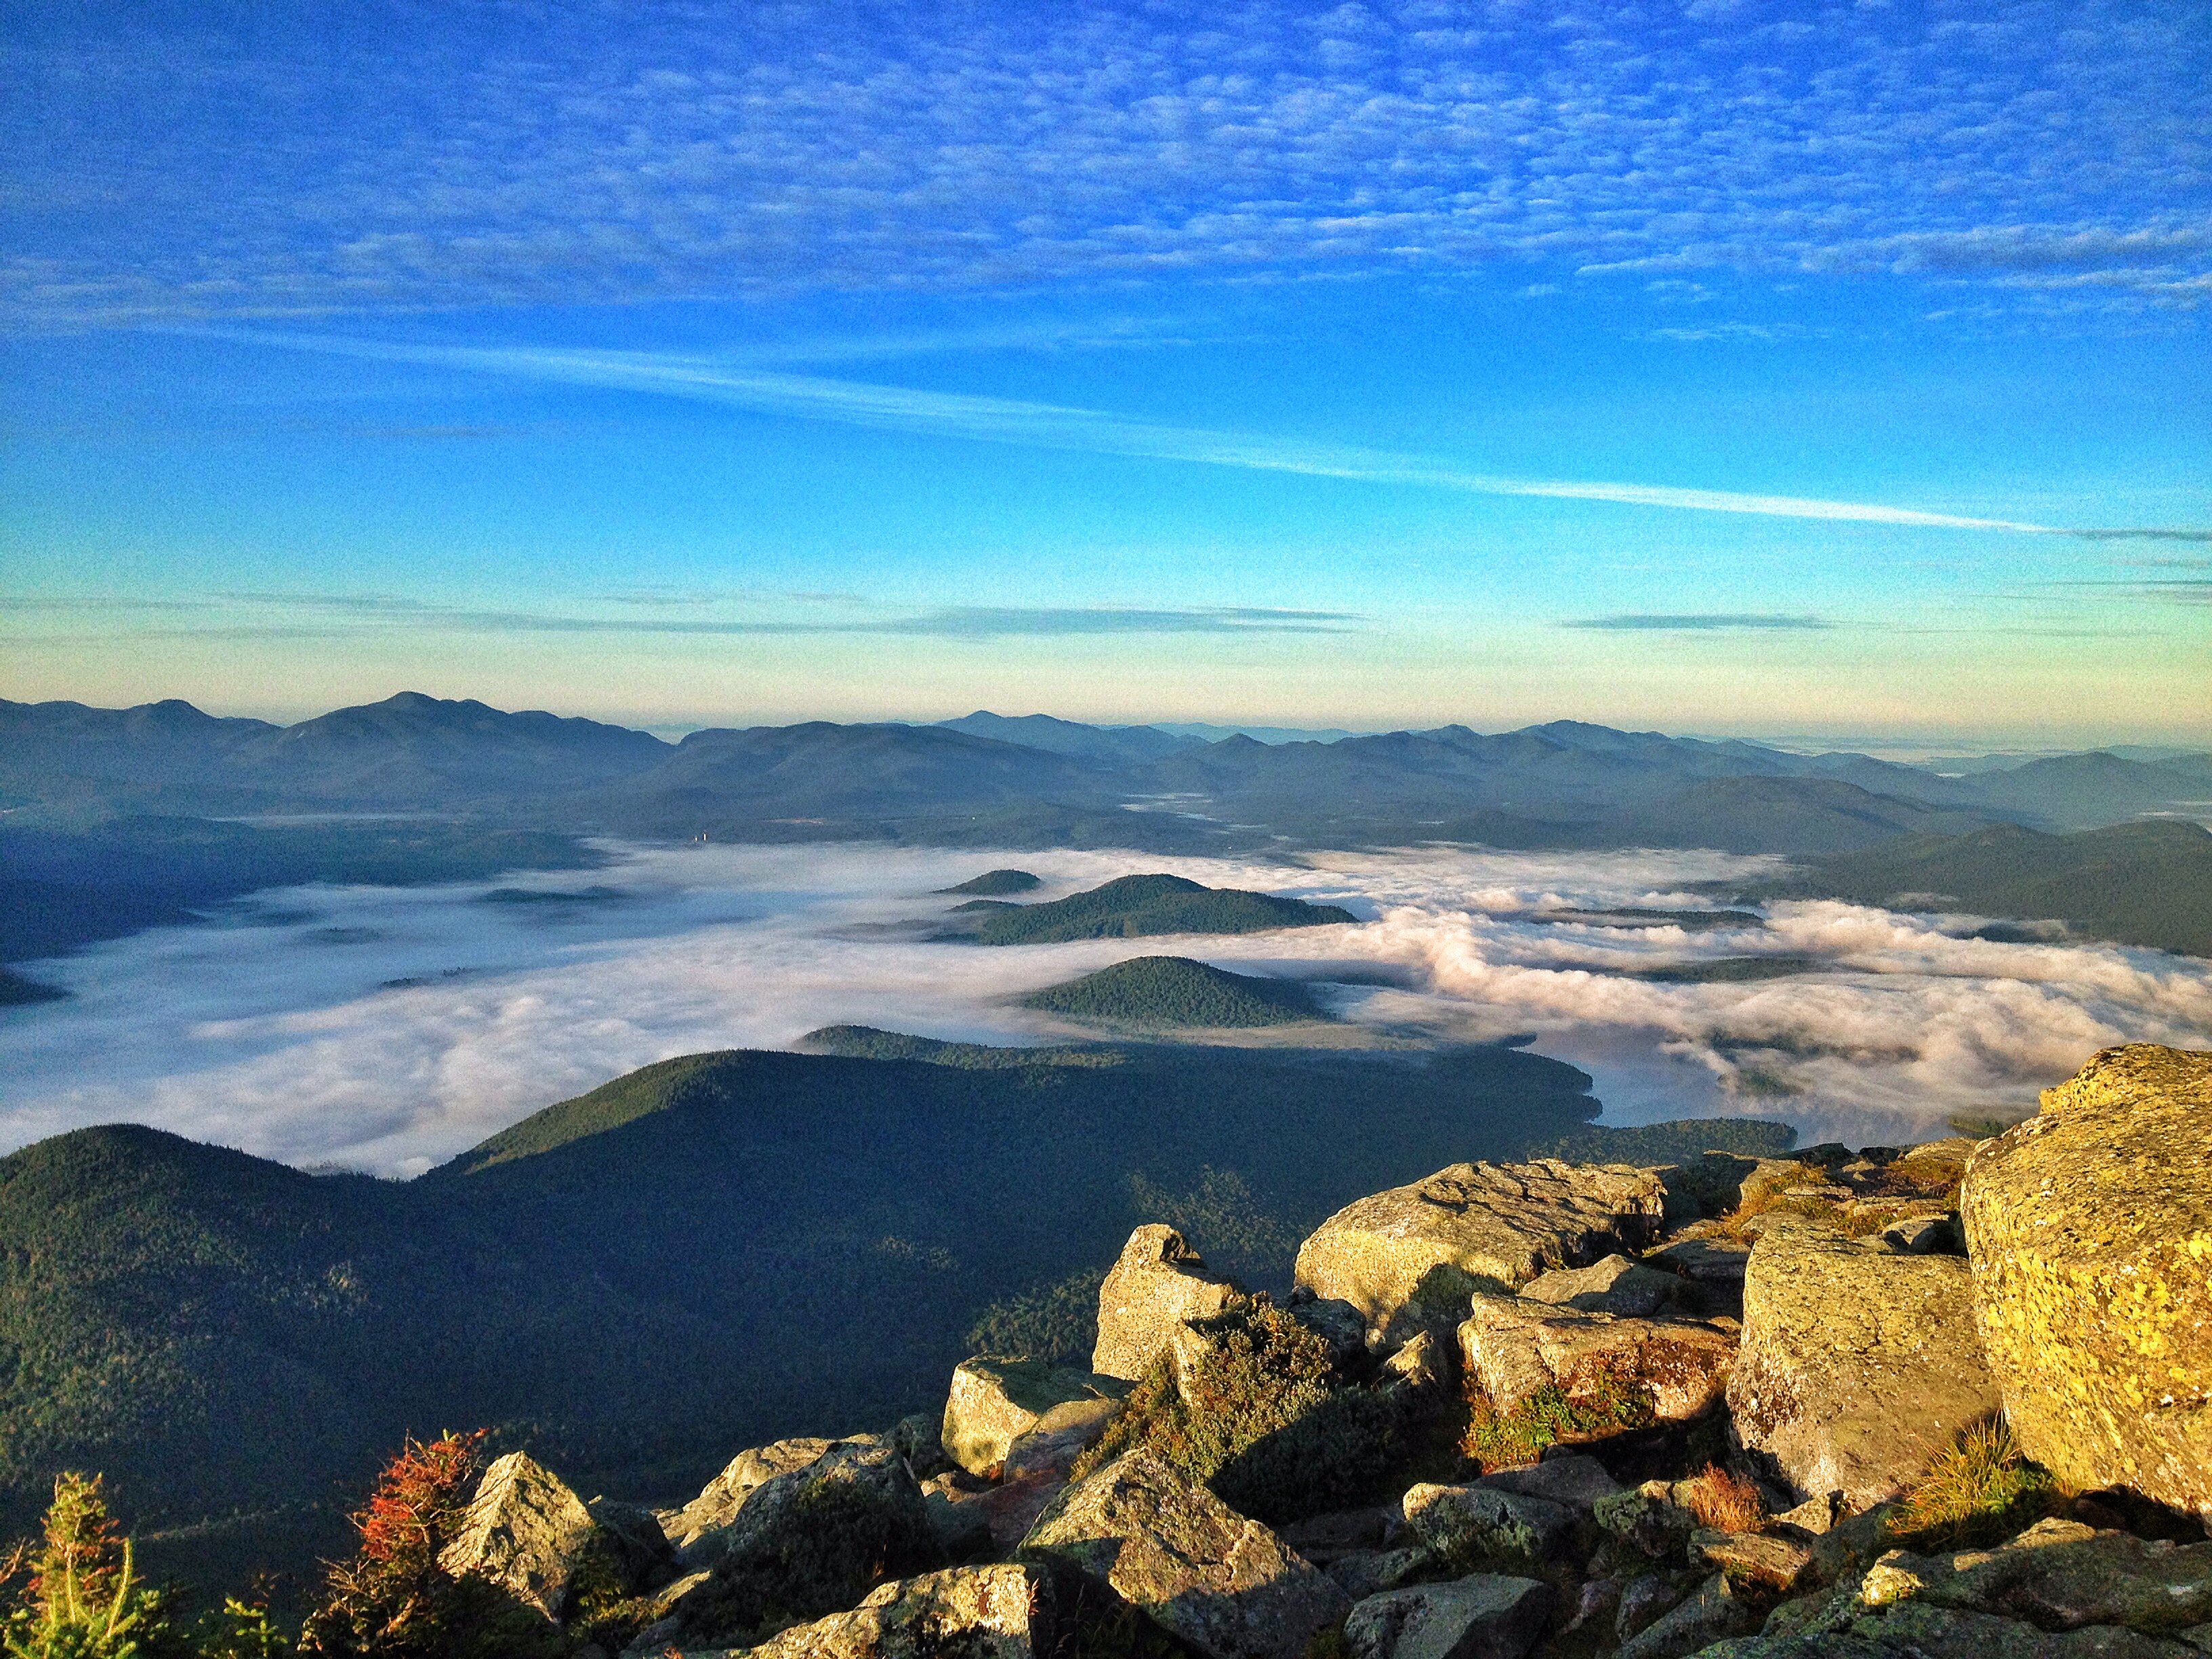 sunrise from Whiteface Mountain; image credit to Kevin Lenhart